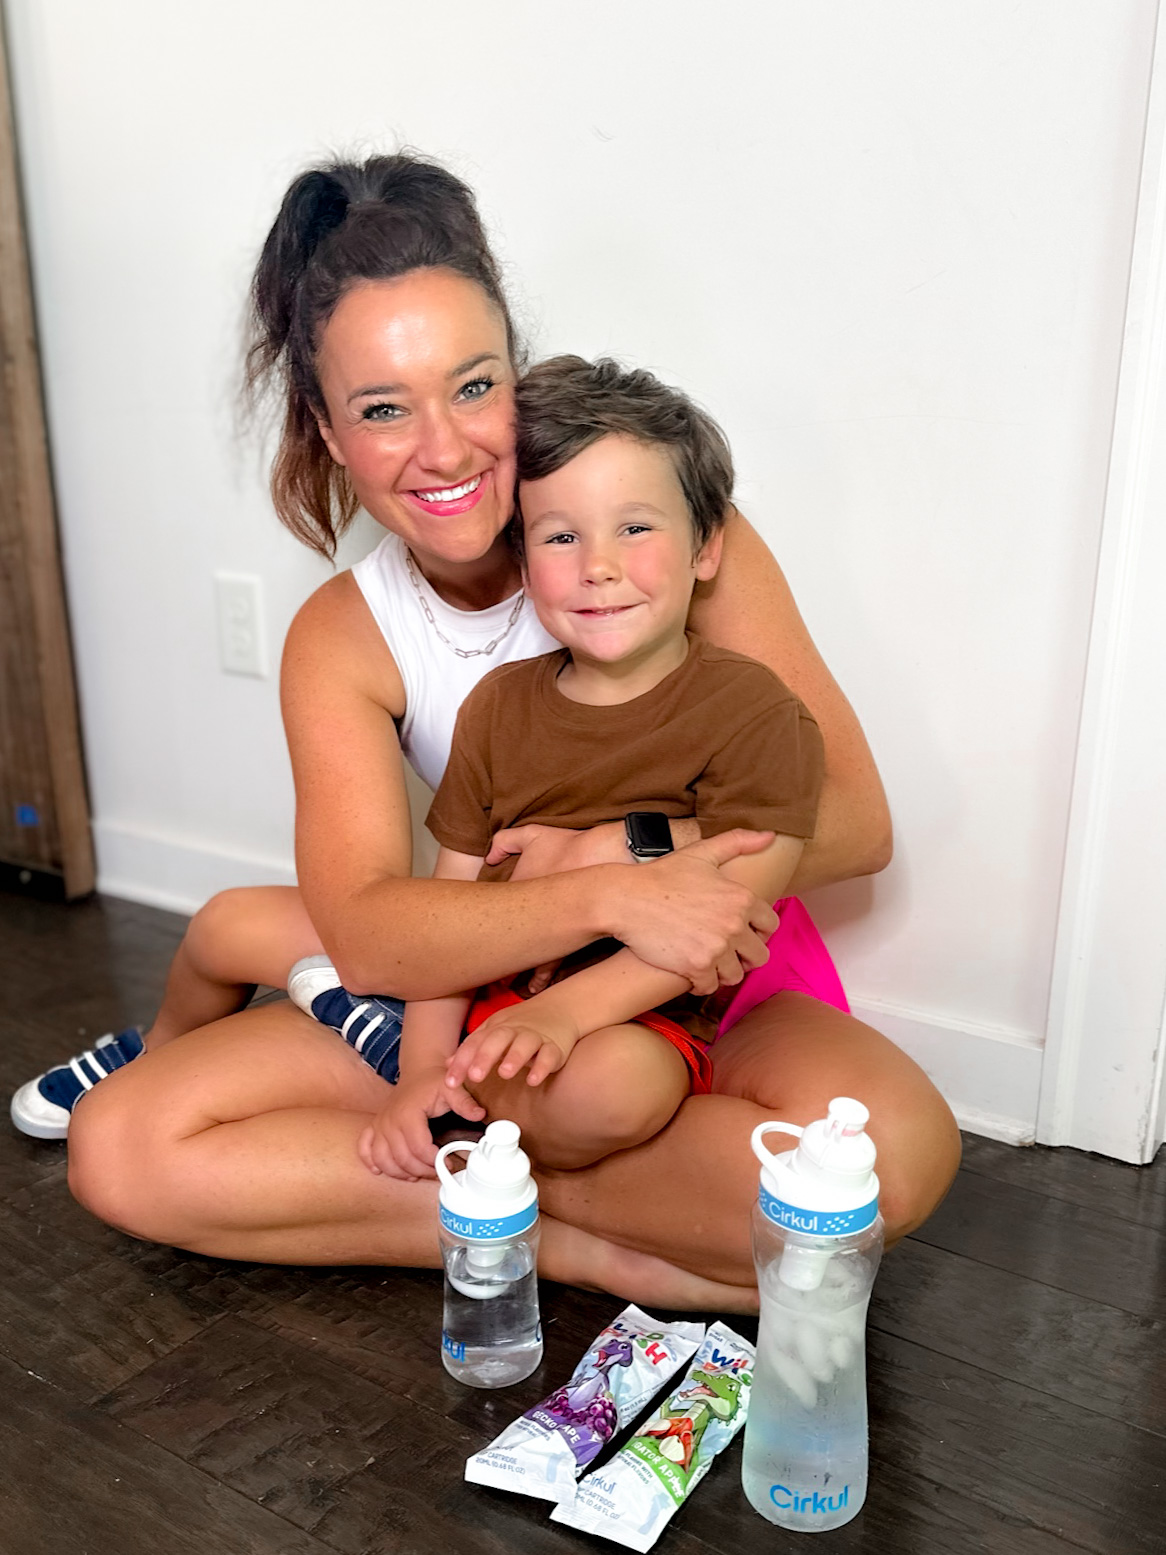 Christian Birmingham mom blogger and podcaster, Heather Brown, shares 12 ways to keep kids hydrated. Her tips are part of habit stacking.